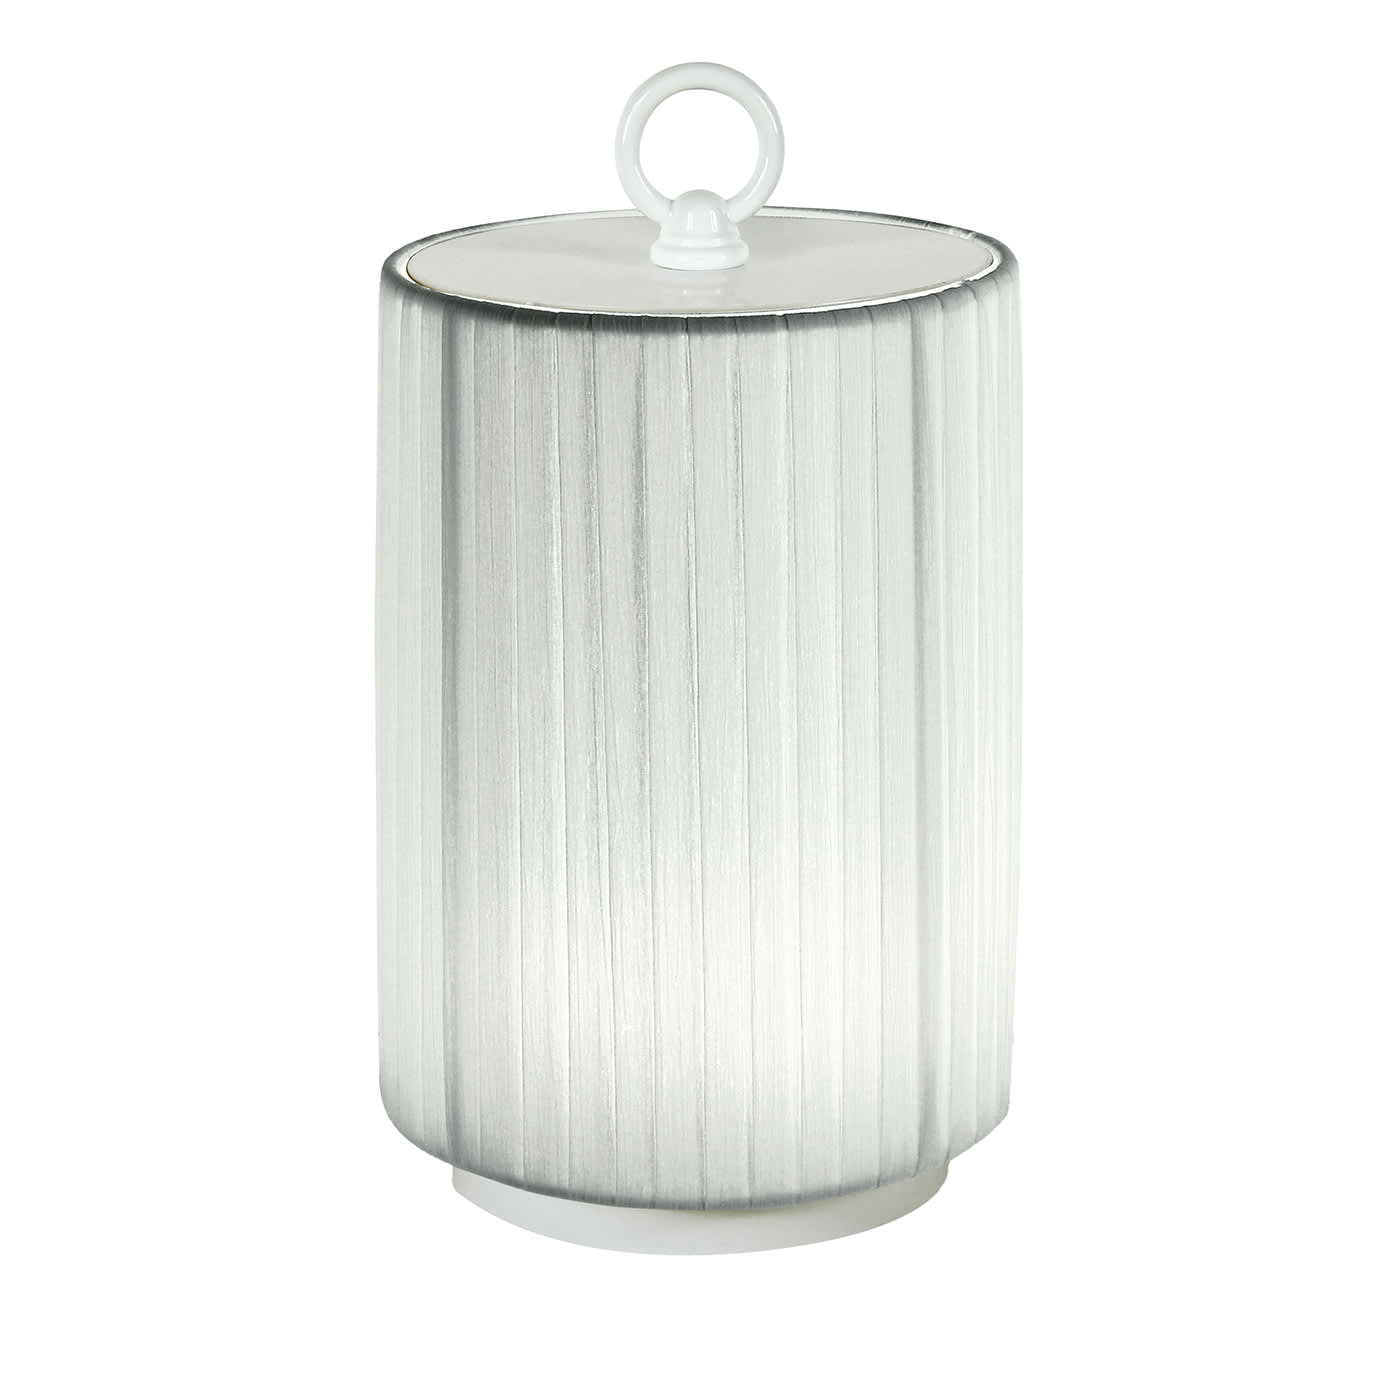 Starlet T Creponne White Table Lamp by Stefano Tabarin - Estro